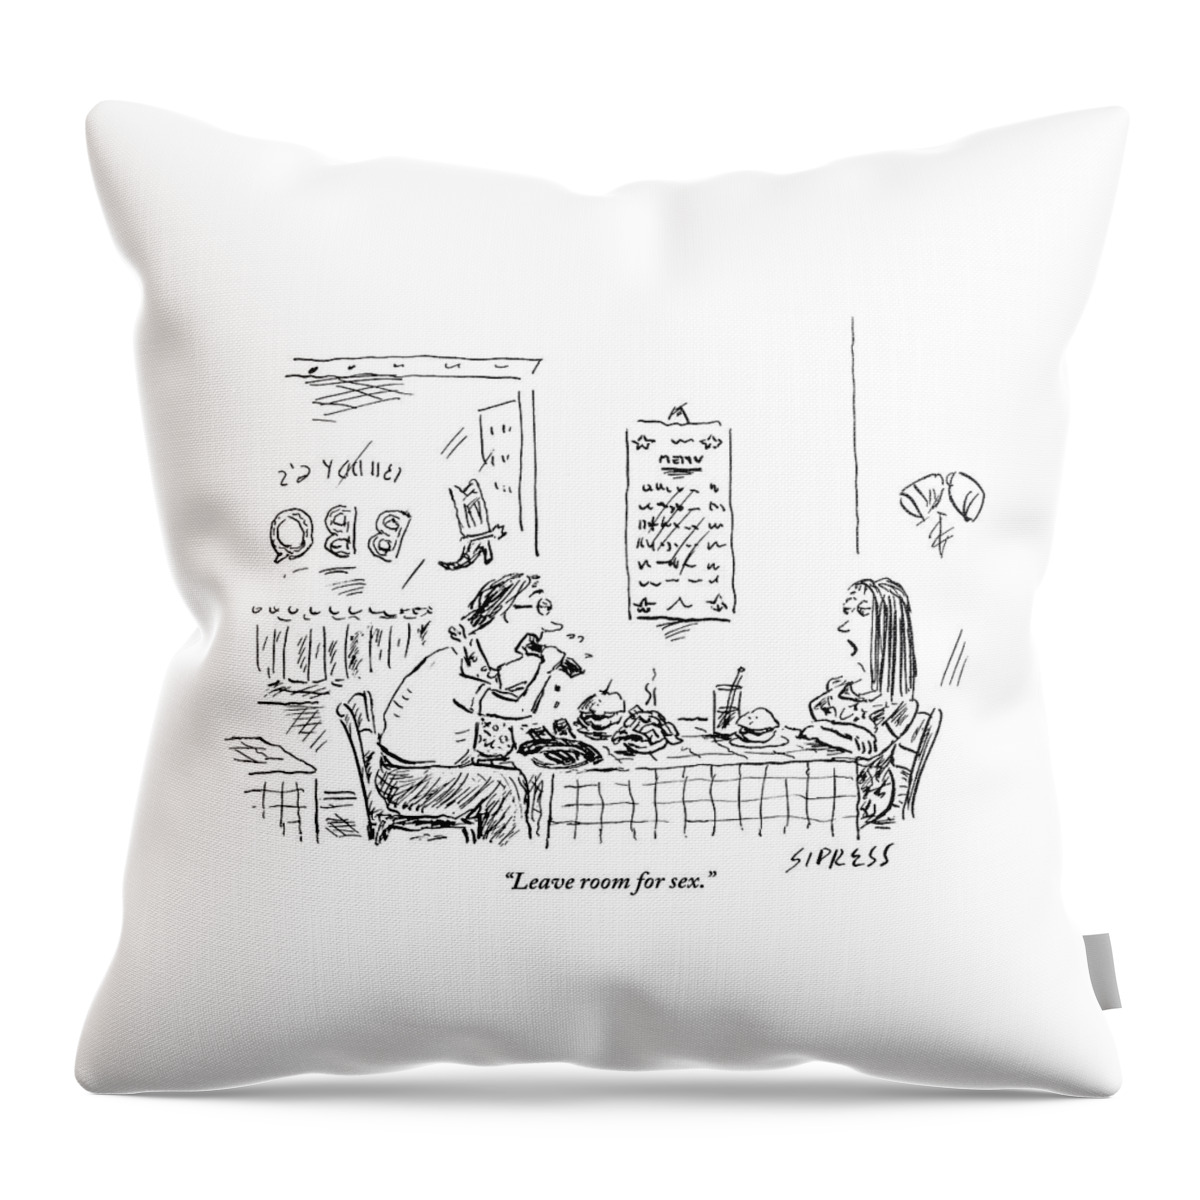 A Woman With Her Arms Crossed Addresses Throw Pillow